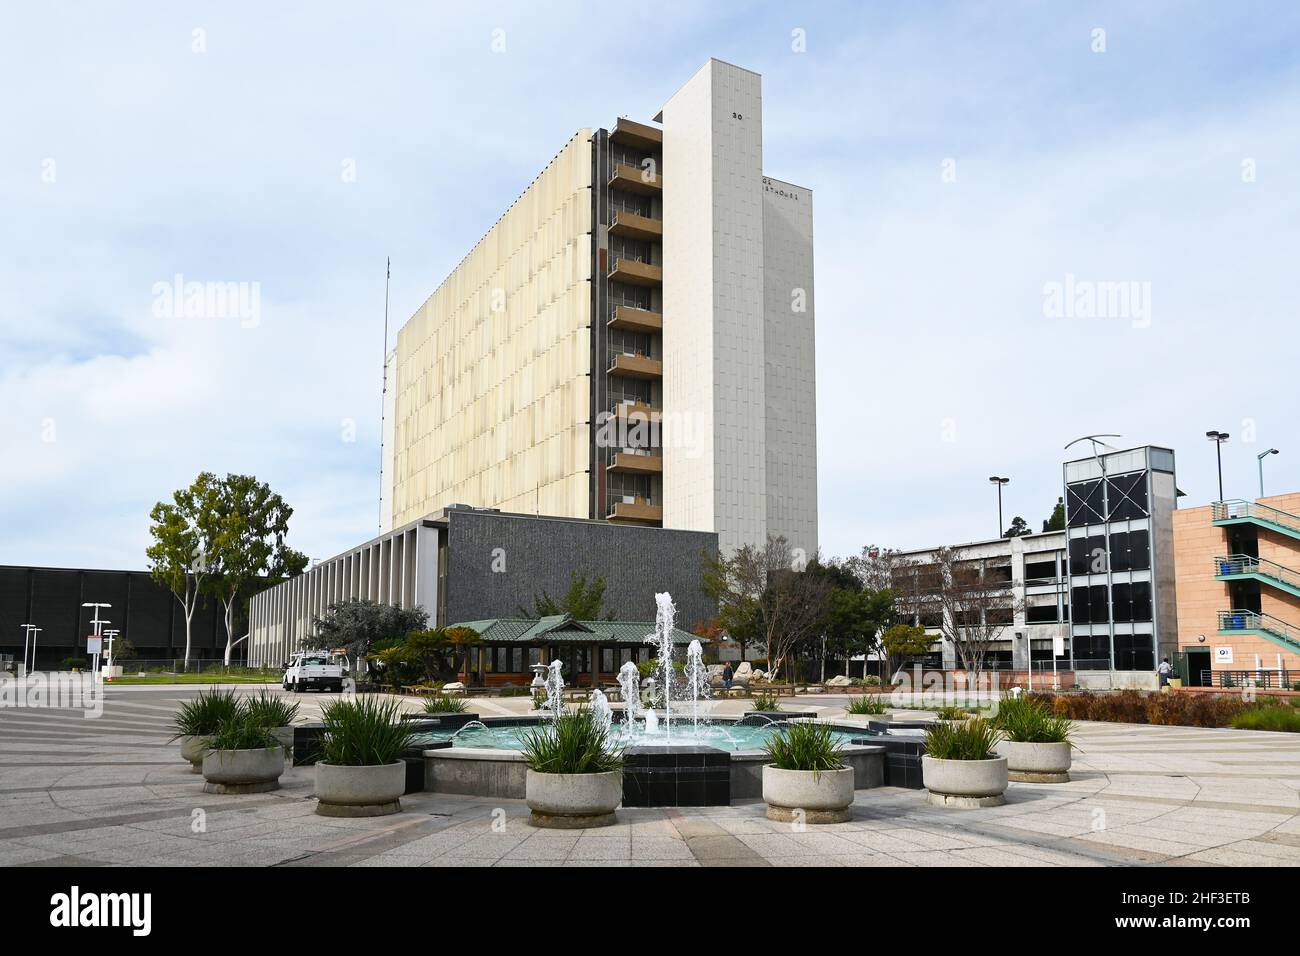 SANTA ANA, CALIFORNIA - 10 JAN 2022: Superior Court Building with Fountain and Japanese Garden and Teahouse, Orange County Civic Center. Stock Photo